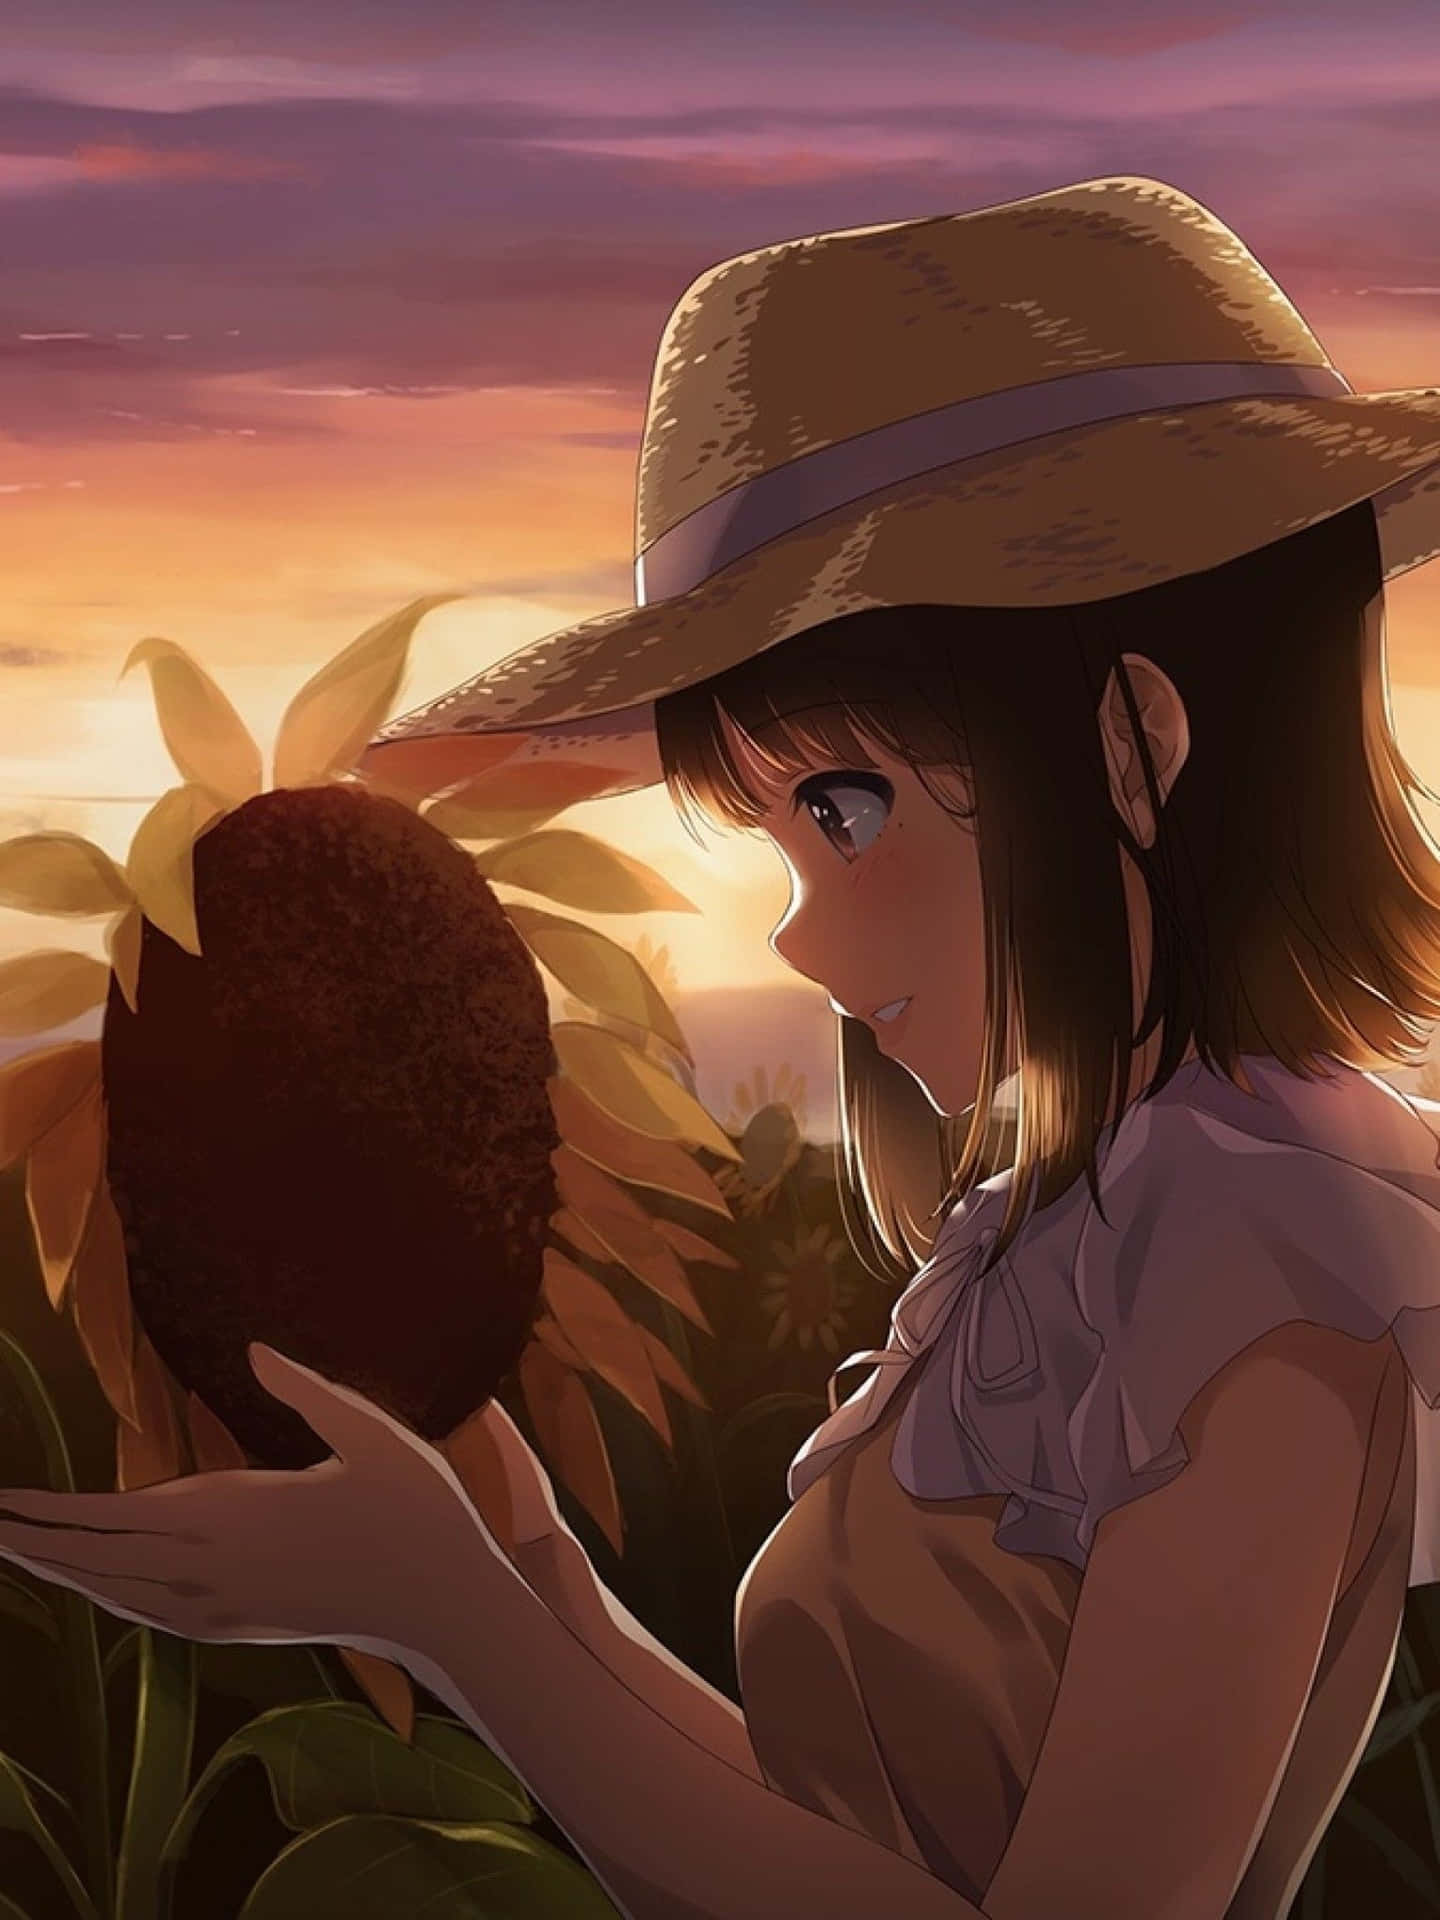 Sunflower Anime Girl Profile Picture